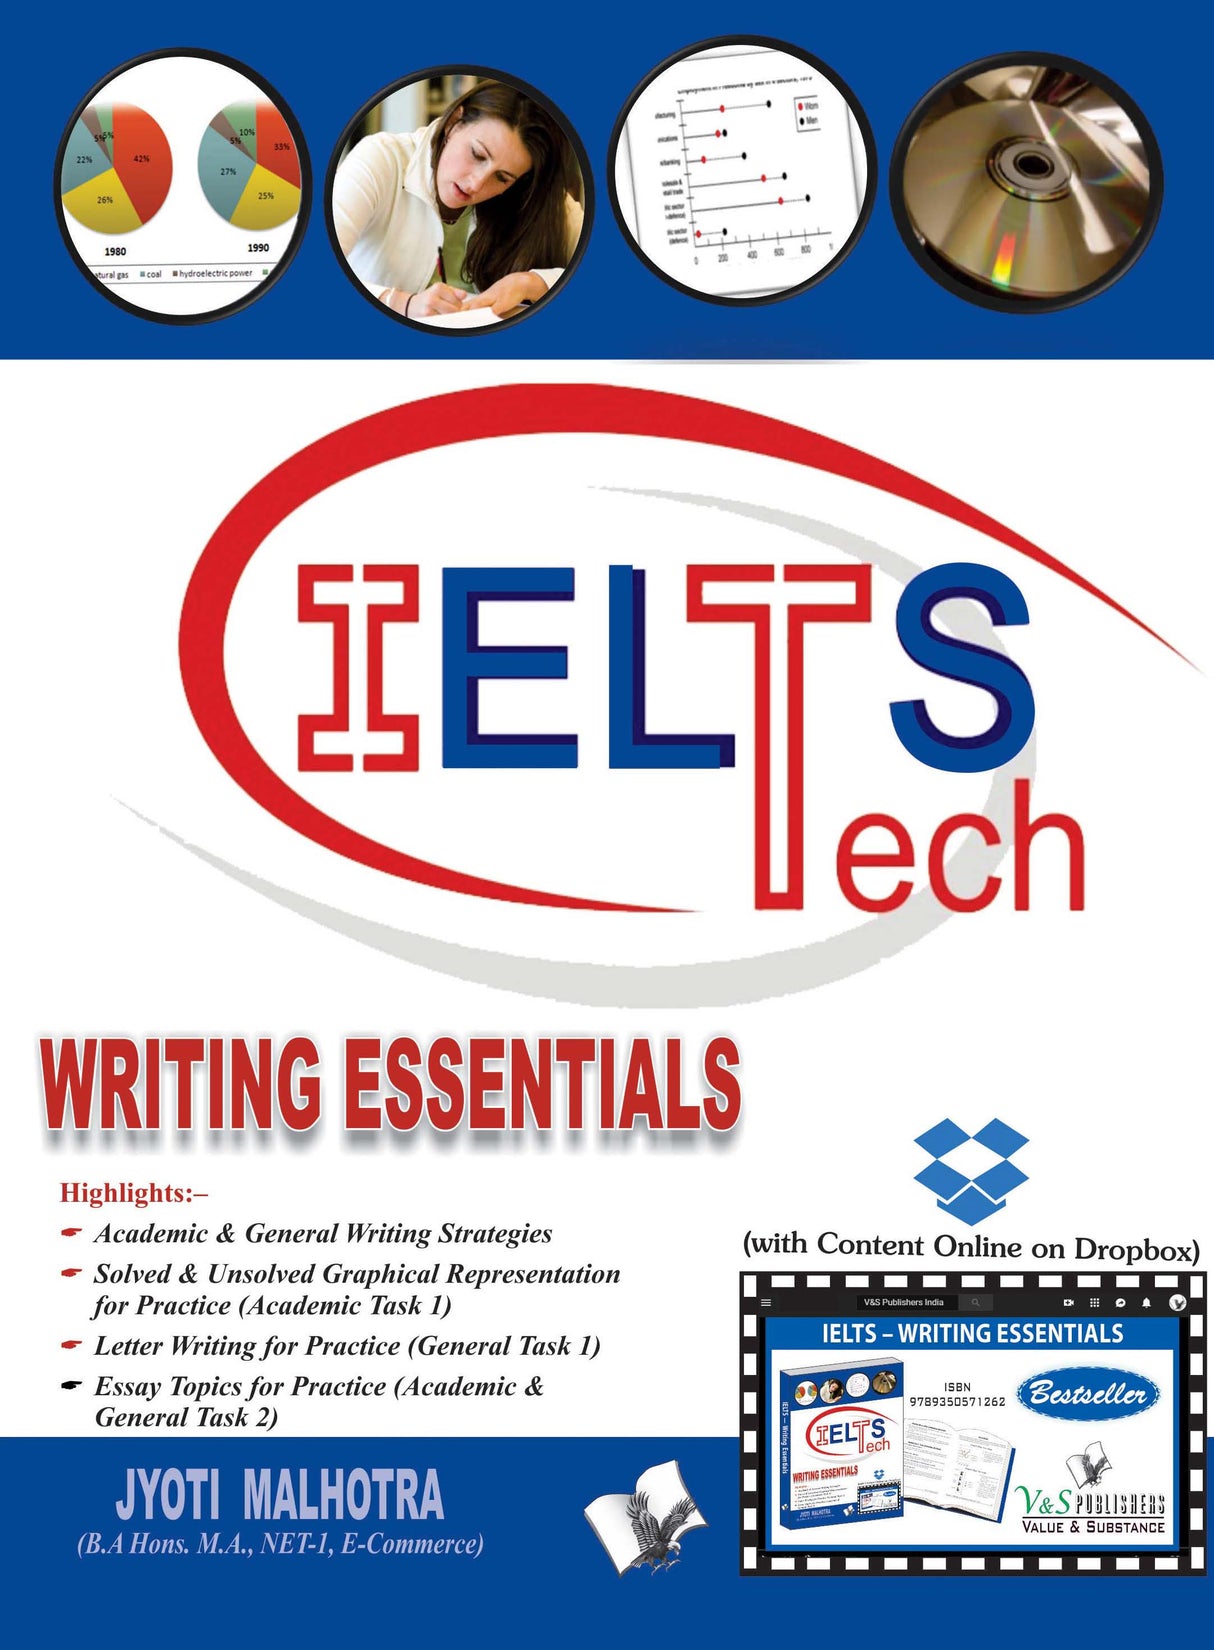 IELTS - Writing Essentials  (With Online Content on  Dropbox): Ideas with probable questions that help score high in Writing Module